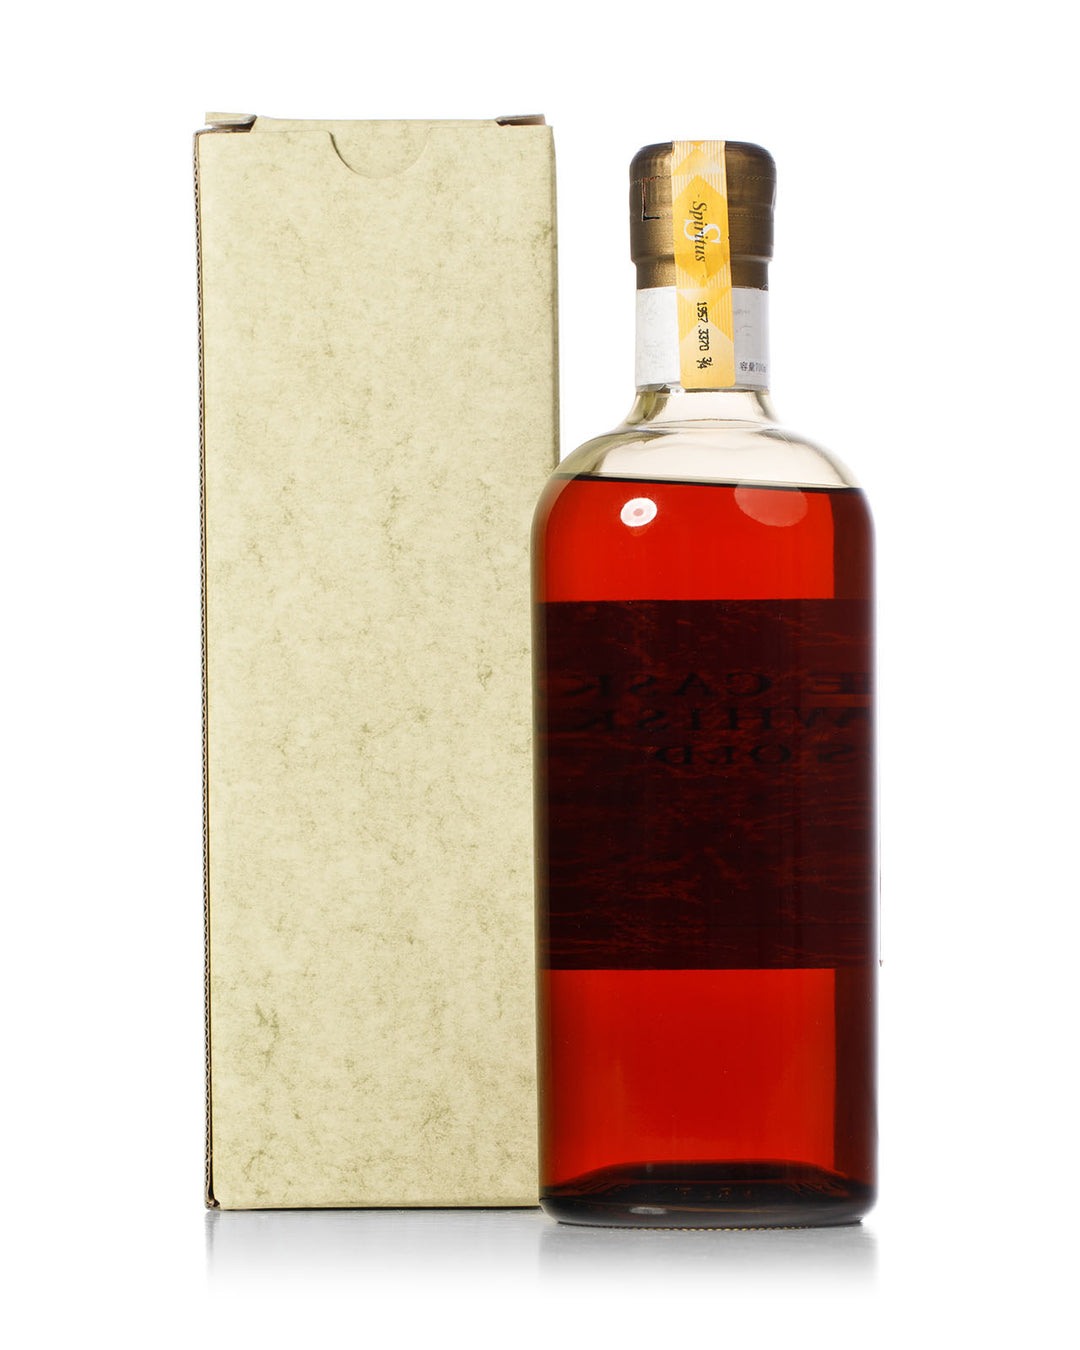 Nikka 1990 10 Year Old Single Cask Warehouse #2 Bottled 2001 Cask No. 223614 With Original Box